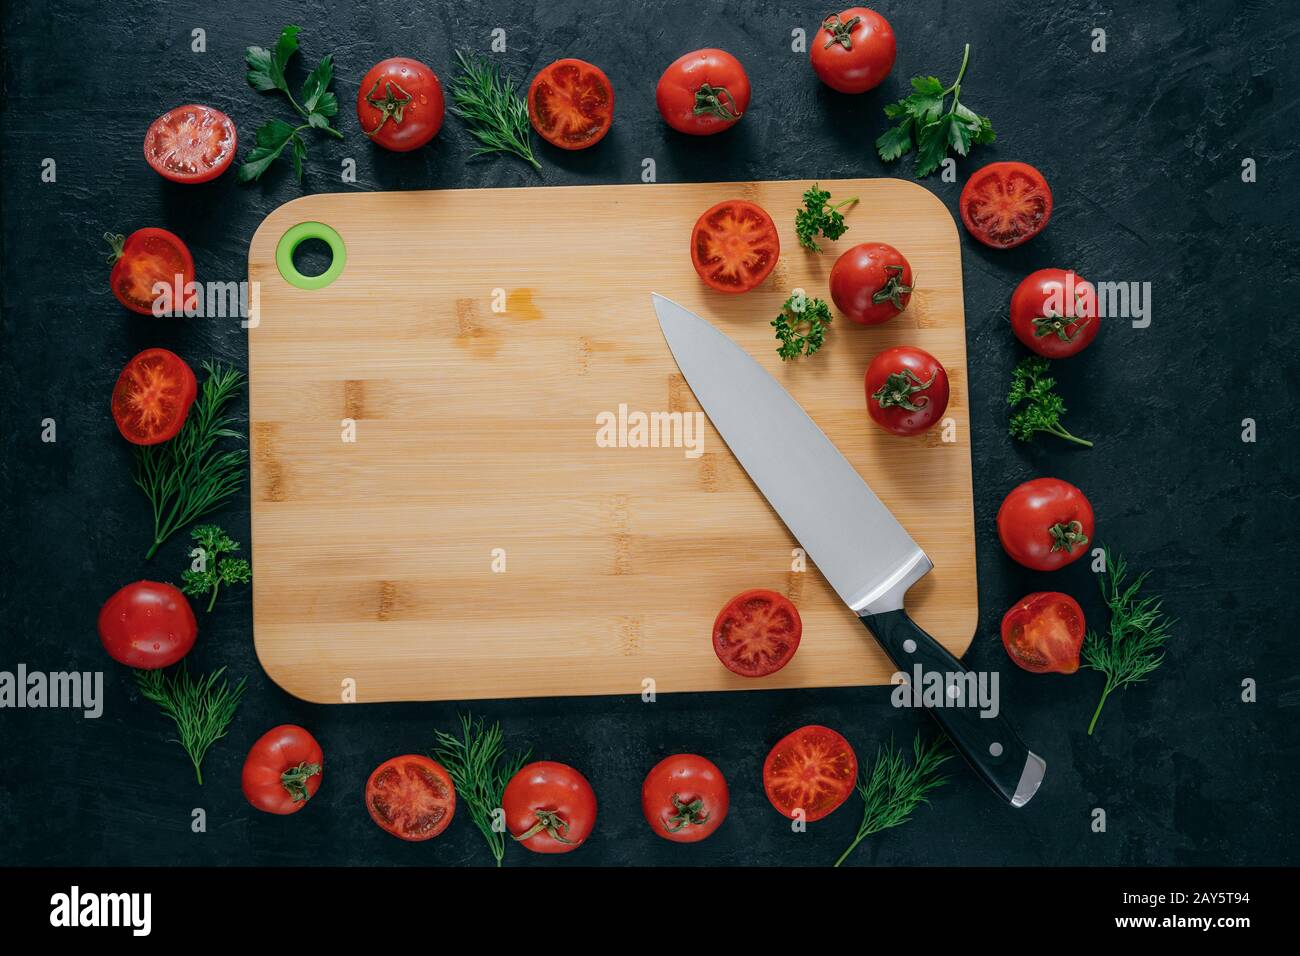 Tomatoes frame around wooden cutting board. Ripe vegetables and slice, green parsley and dill near kitchen board and knife. Food art Stock Photo